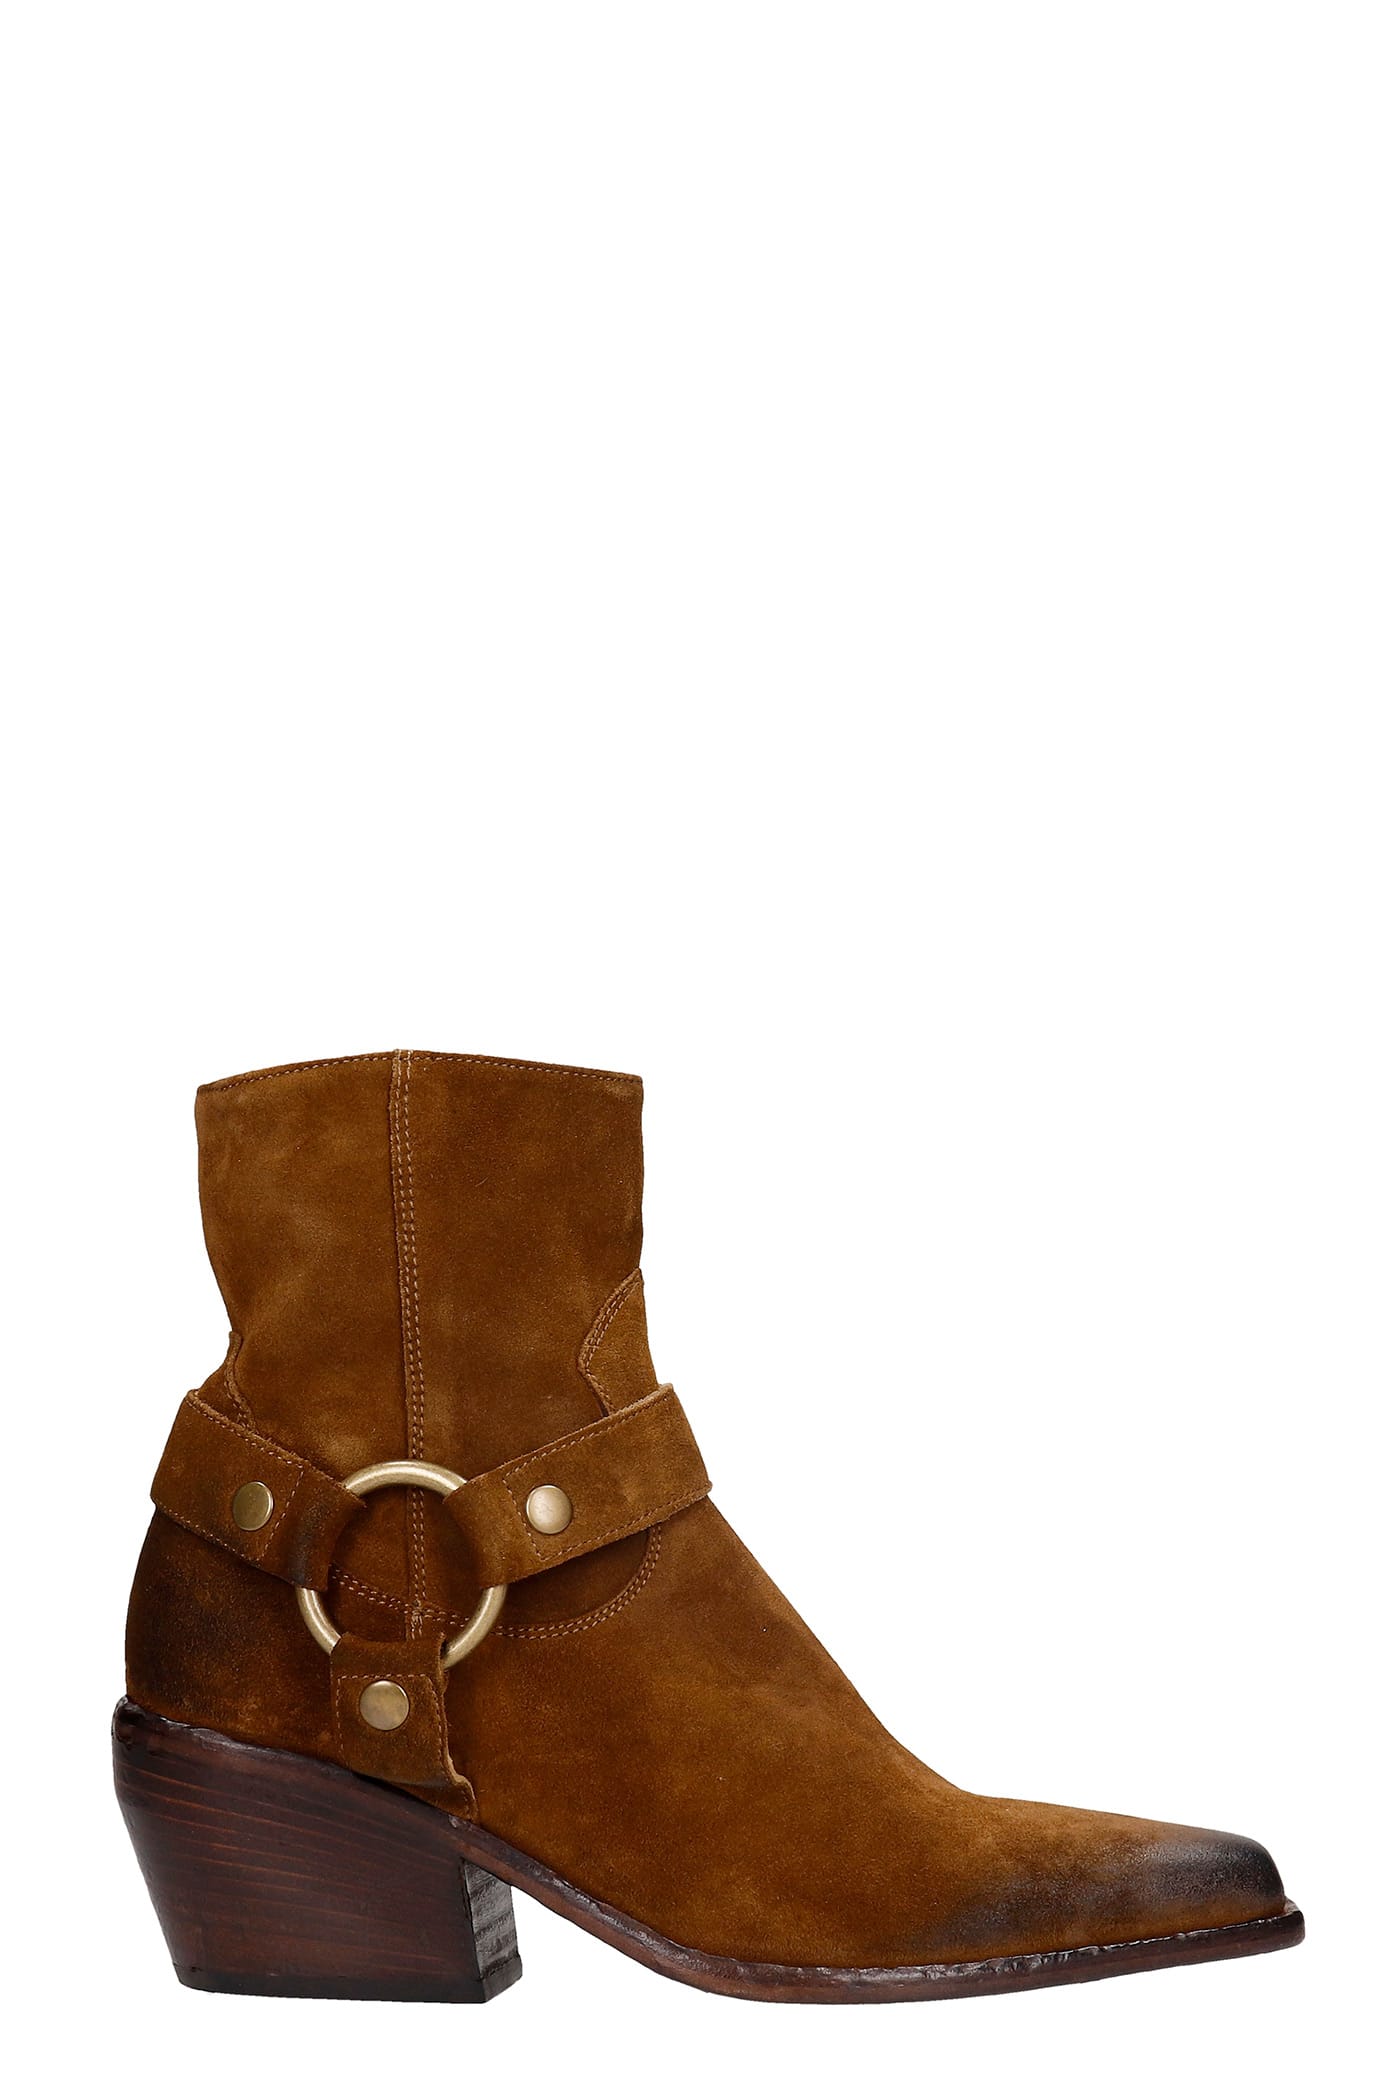 Elena Iachi Texan Ankle Boots In Leather Color Suede